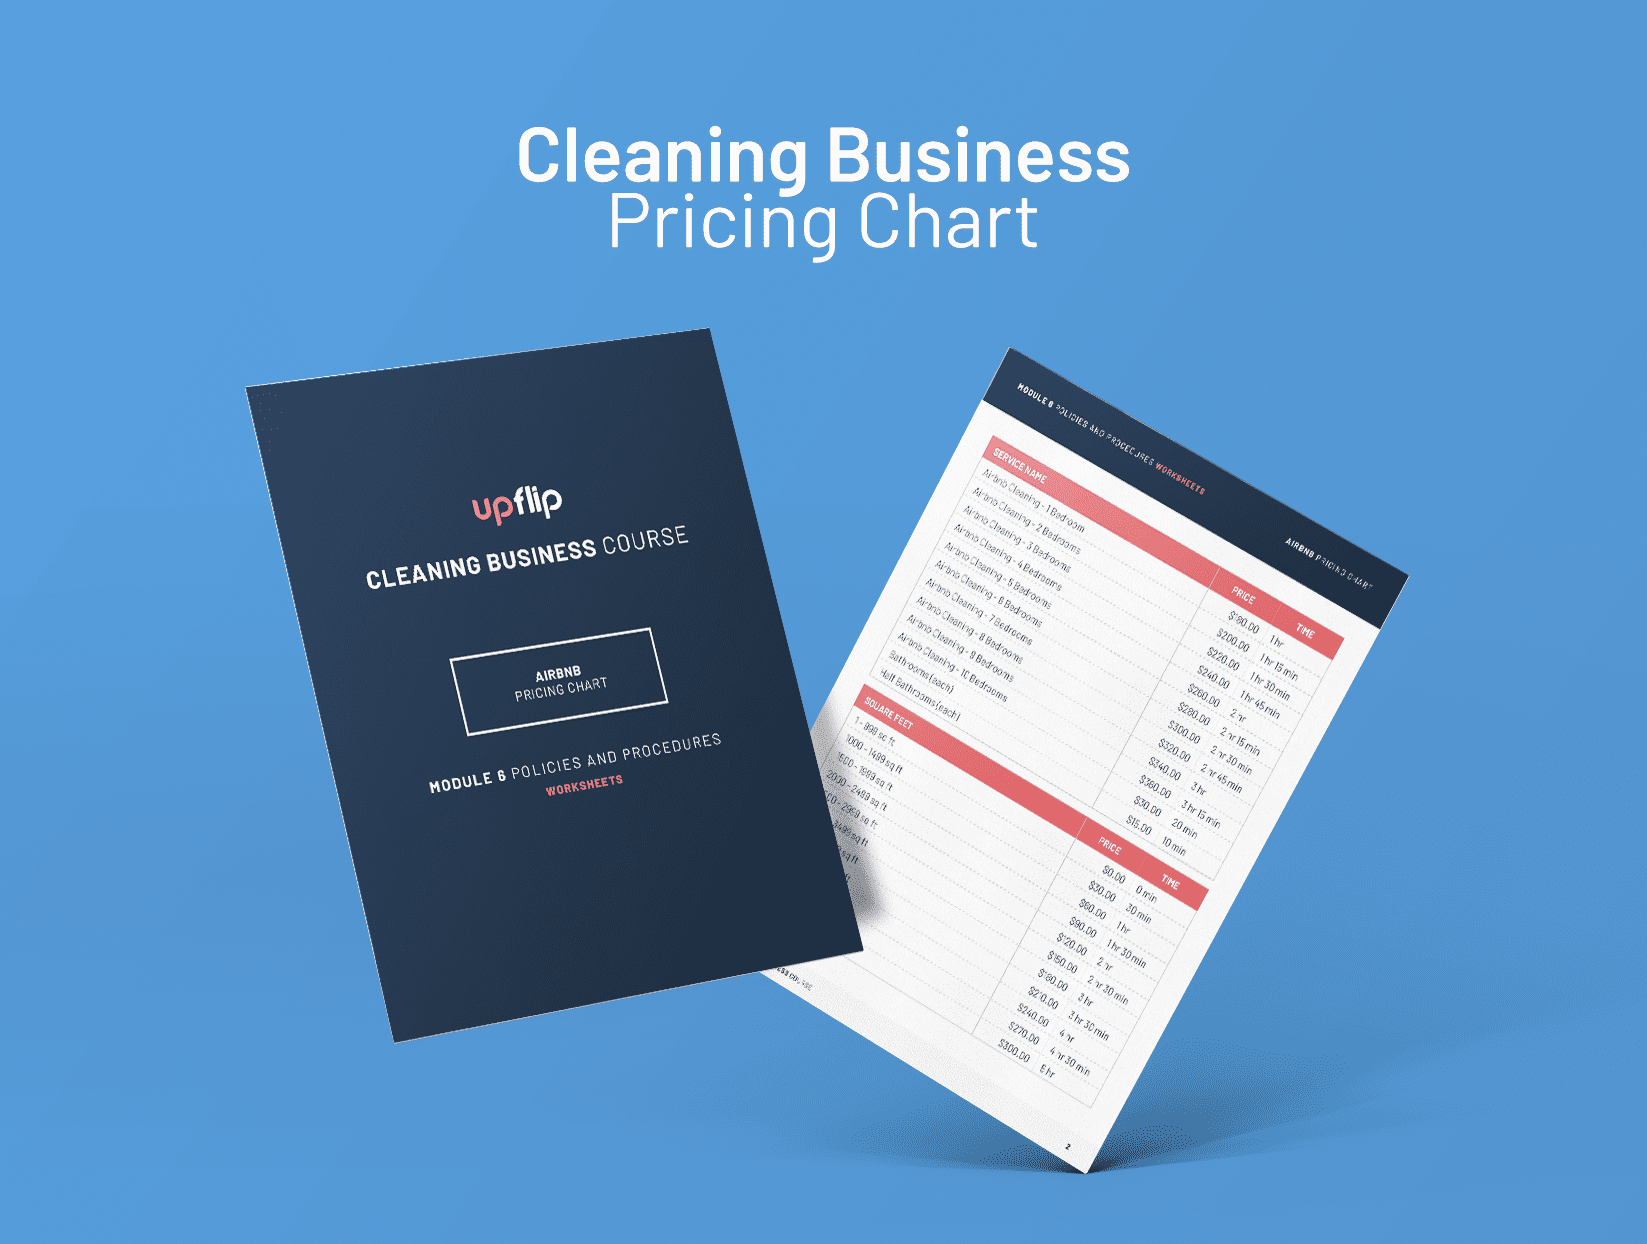 Cleaning business pricing chart